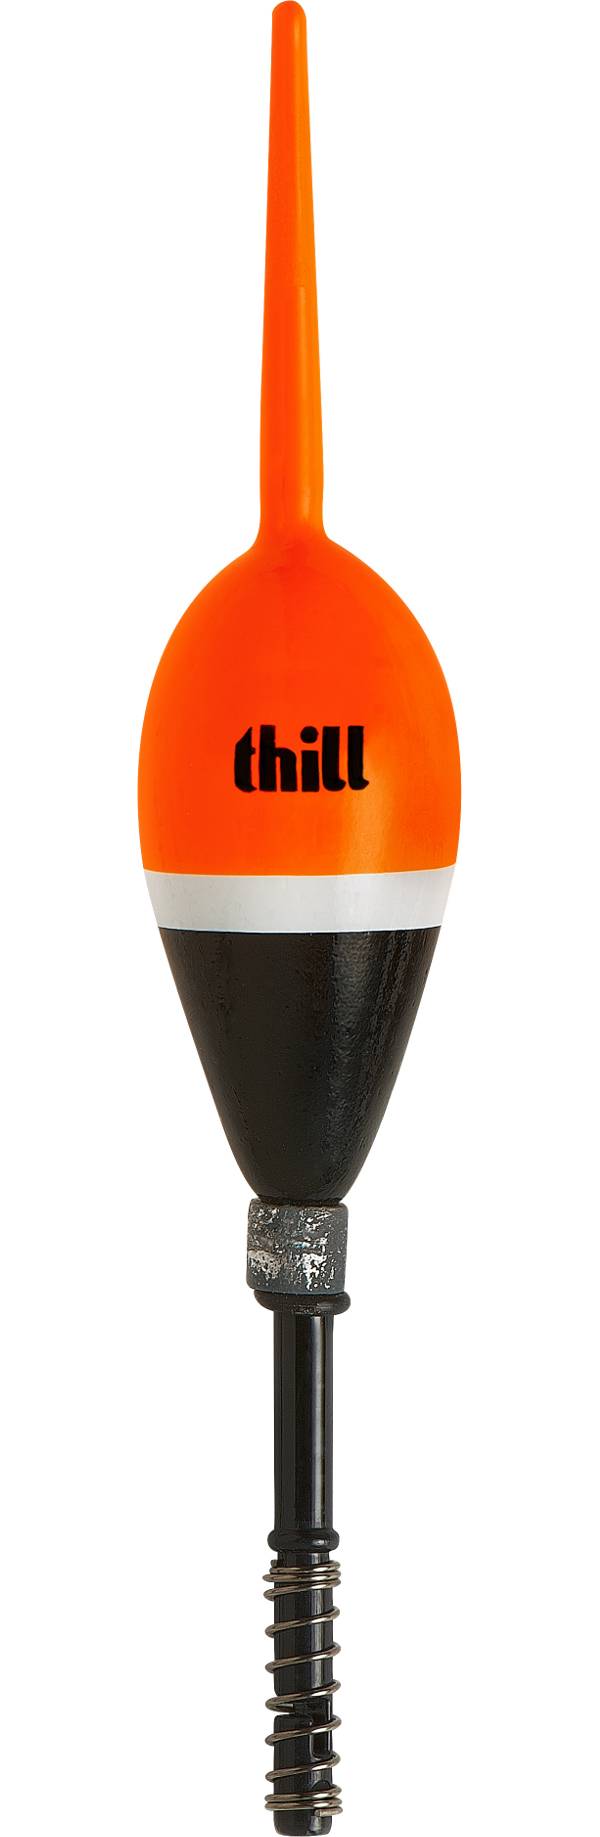 Thill Premium Weighted Spring Floats